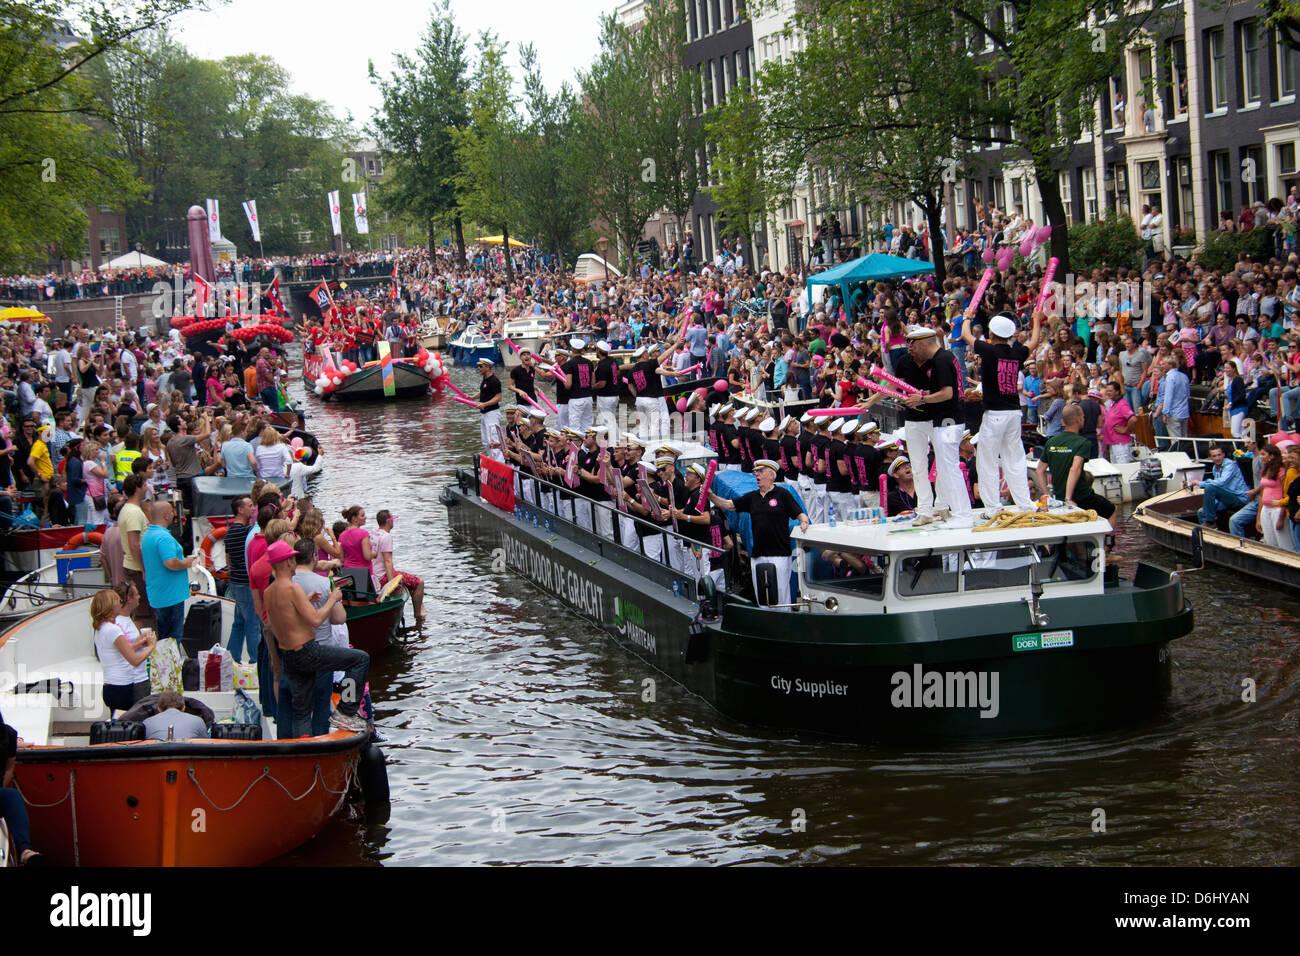 The Gay Pride Parade Down A Crowded Canal Lined With People And Boats